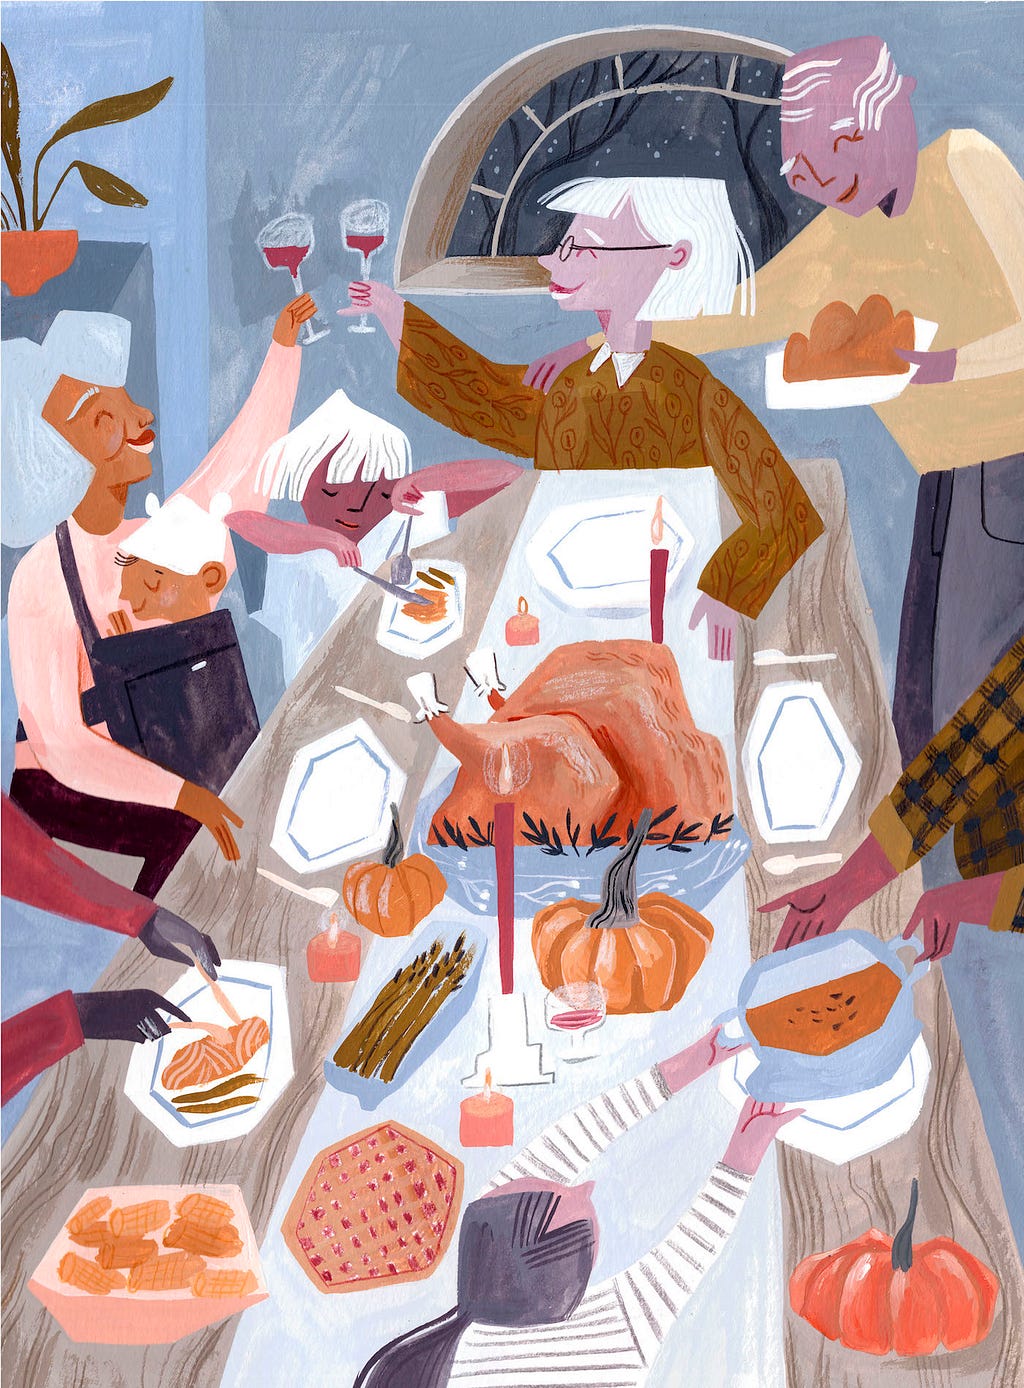 a white haired woman clinks her glass with a gray haired woman carrying a baby while a man serves a dish on a table with a big turkey in the middle by Rae Ritchie (represented by Jennifer Nelson Artists, Inc.)